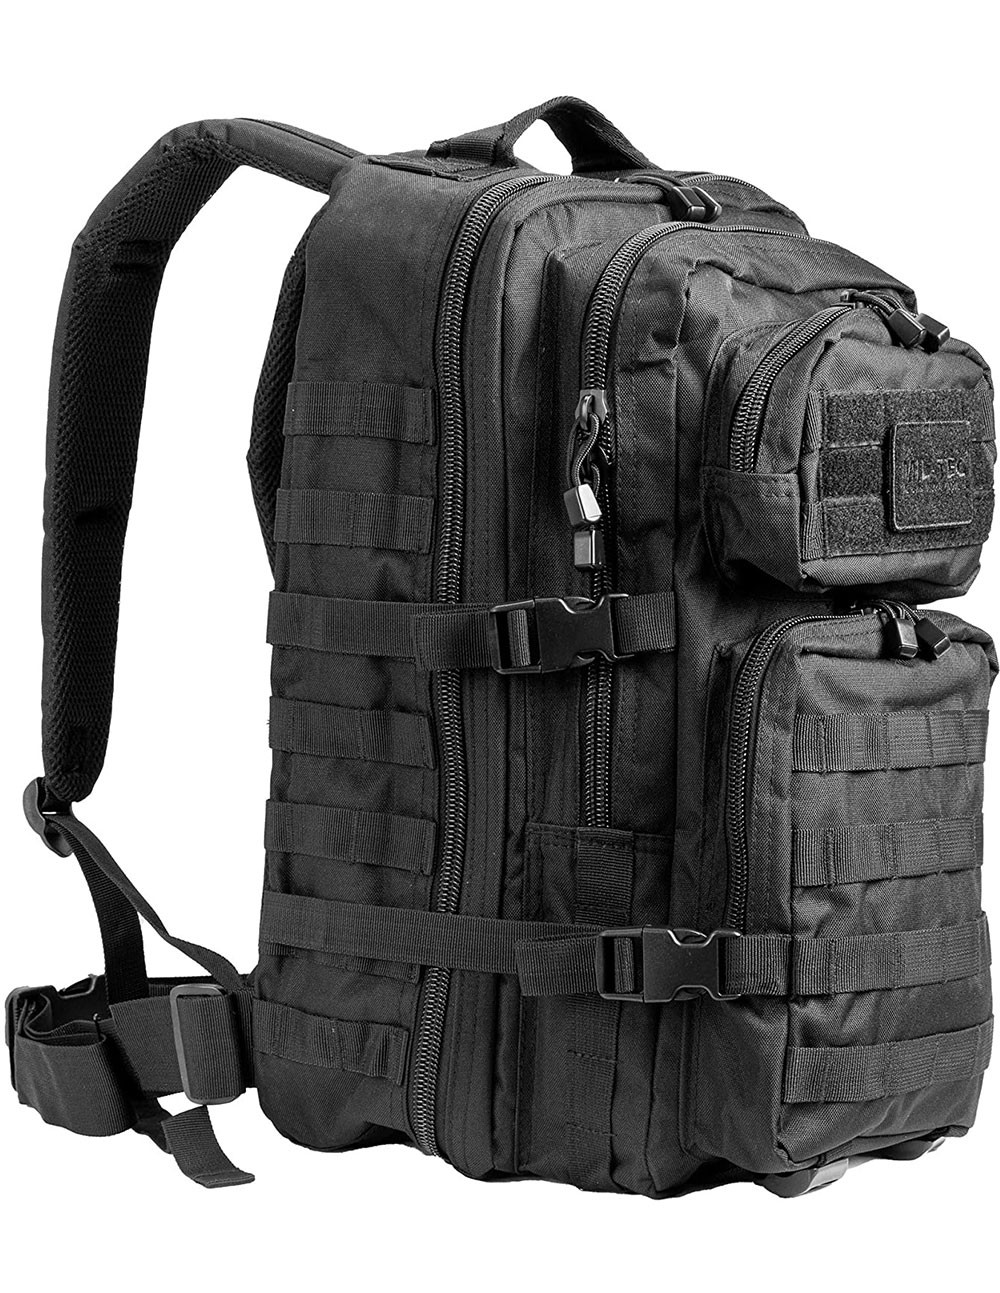 Outdoor Camping Hiking Hunting Army Backpack Assault 36l Black 14002202